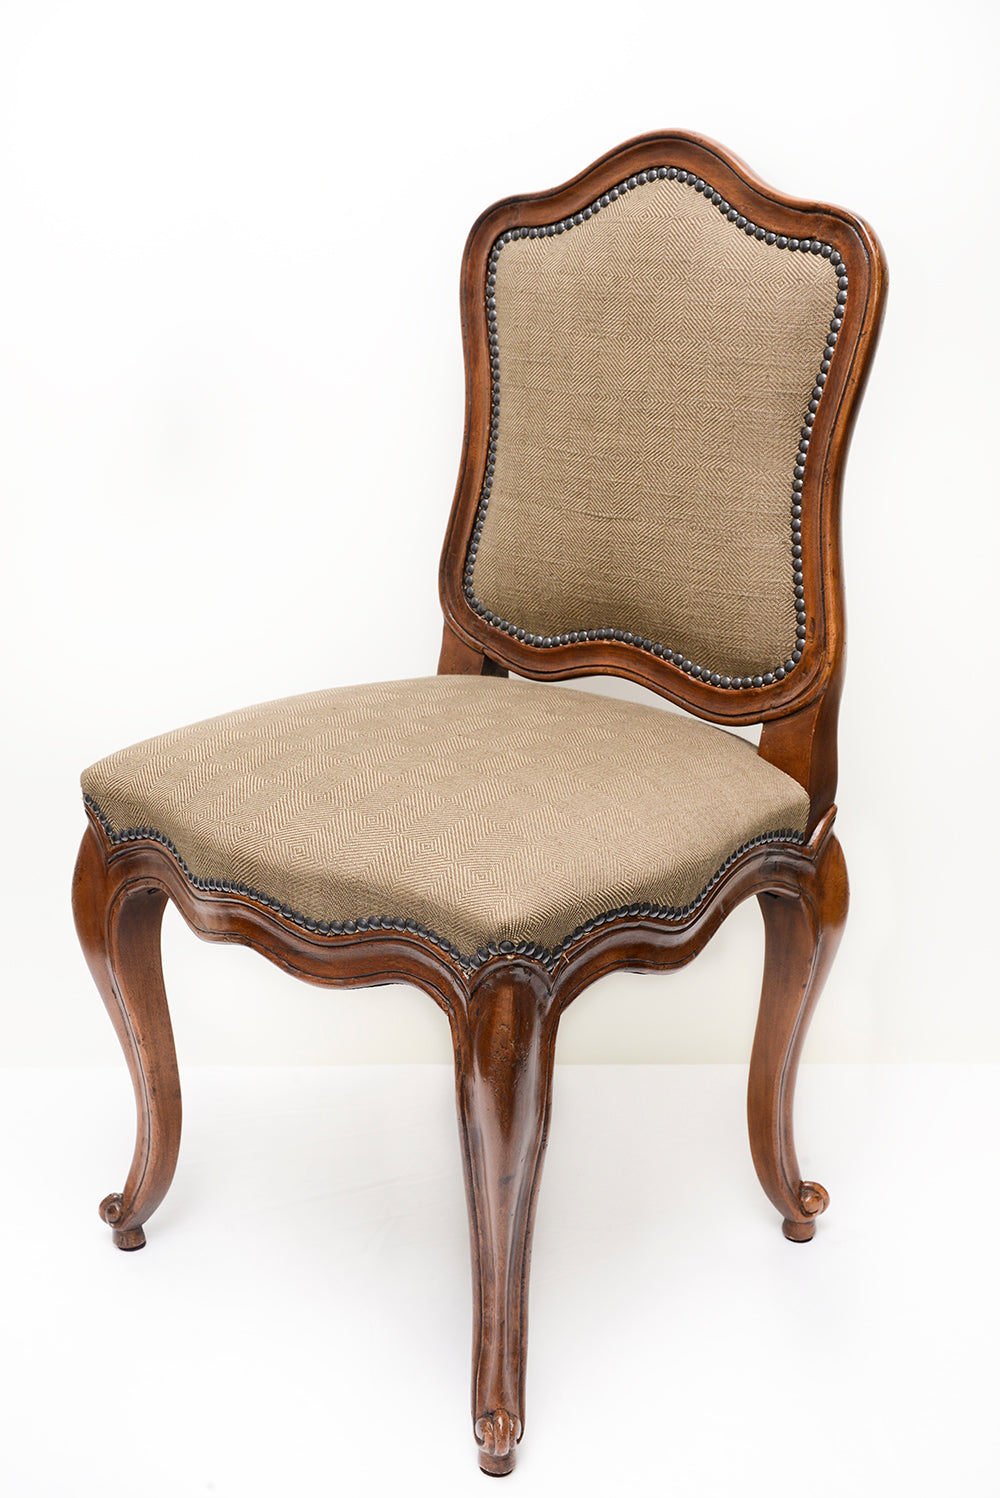 A French Provincial Hamel Style Dining Chairs